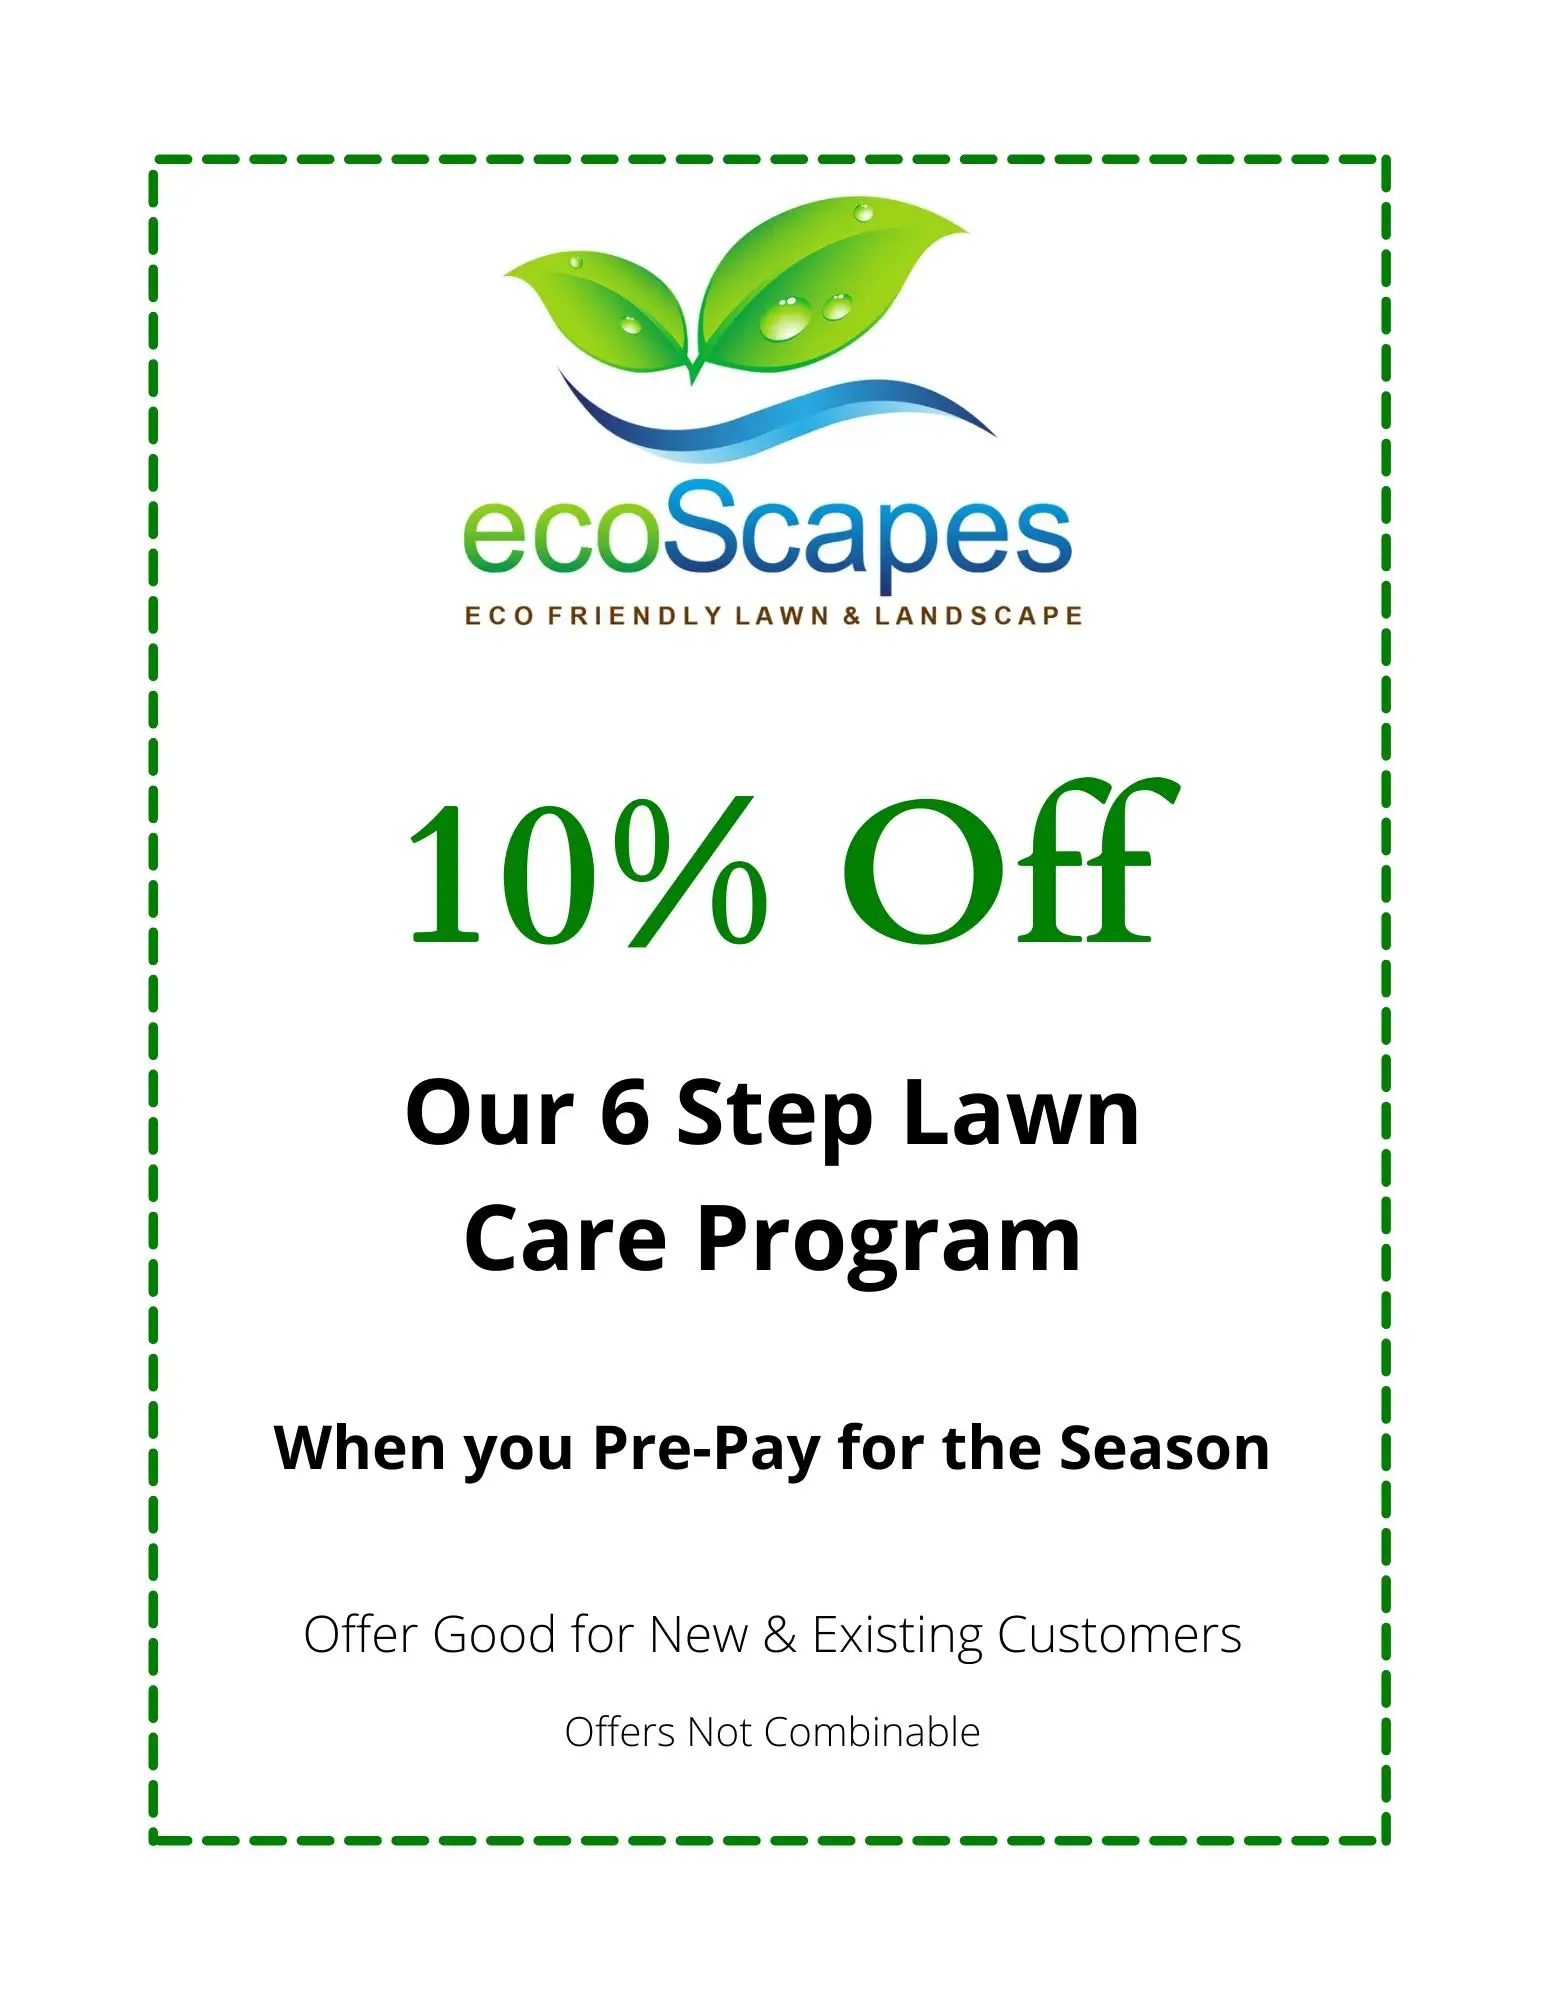 Coupon to Save 10 Percent on EcoScapes Lawn Care Program